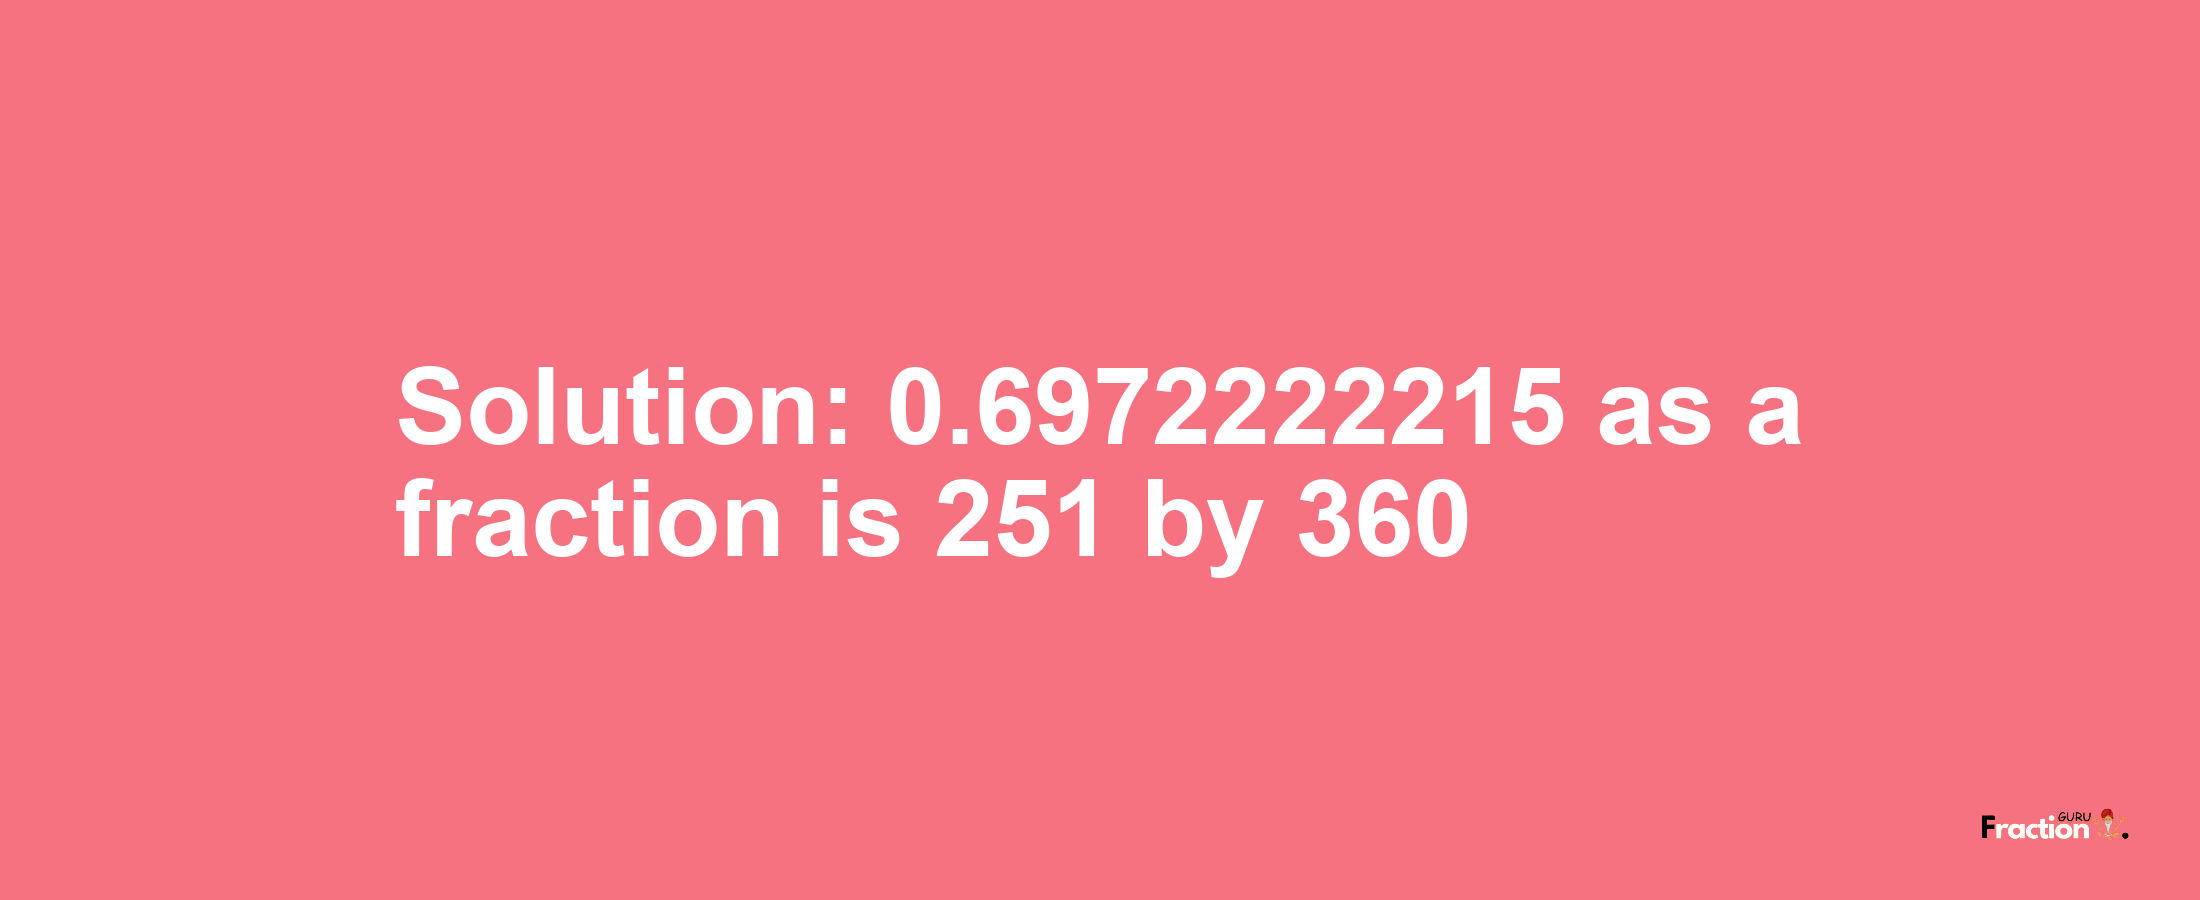 Solution:0.6972222215 as a fraction is 251/360